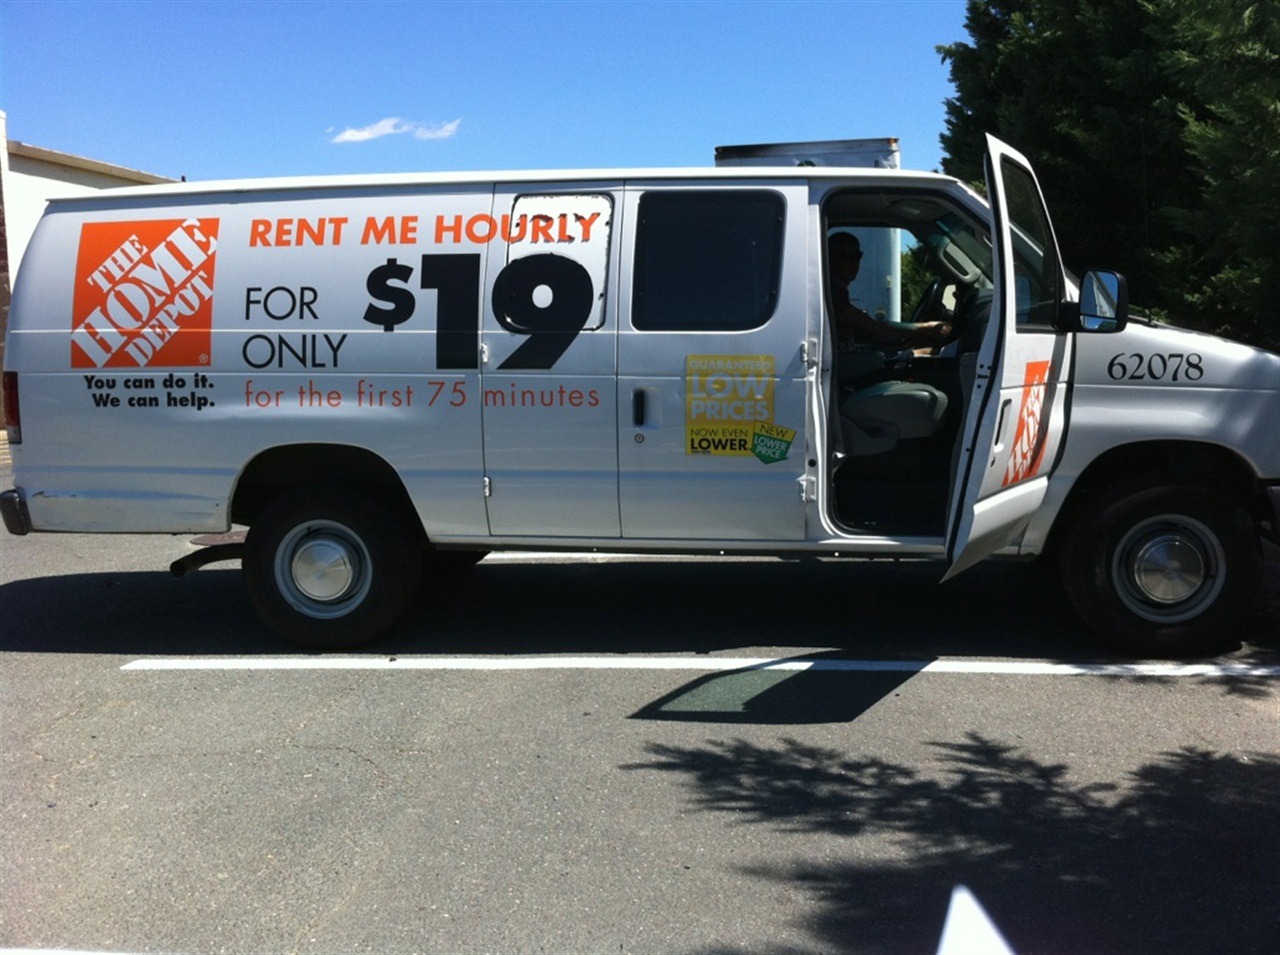 How Much Does Home Depot Charge For Truck Rental